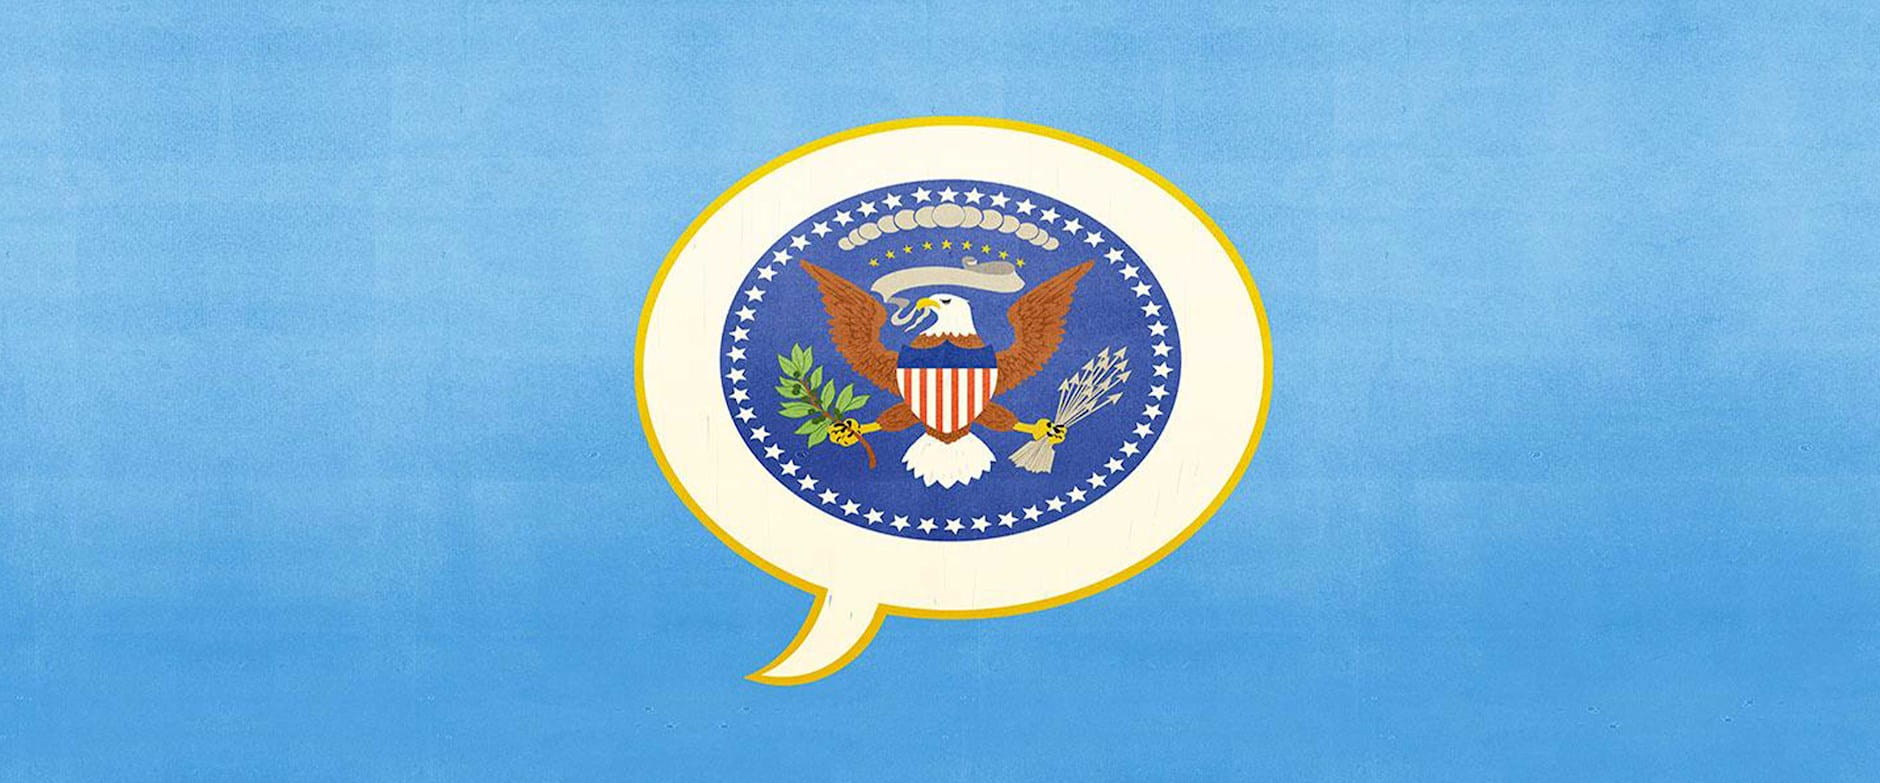 US Presidential seal inside a word bubble